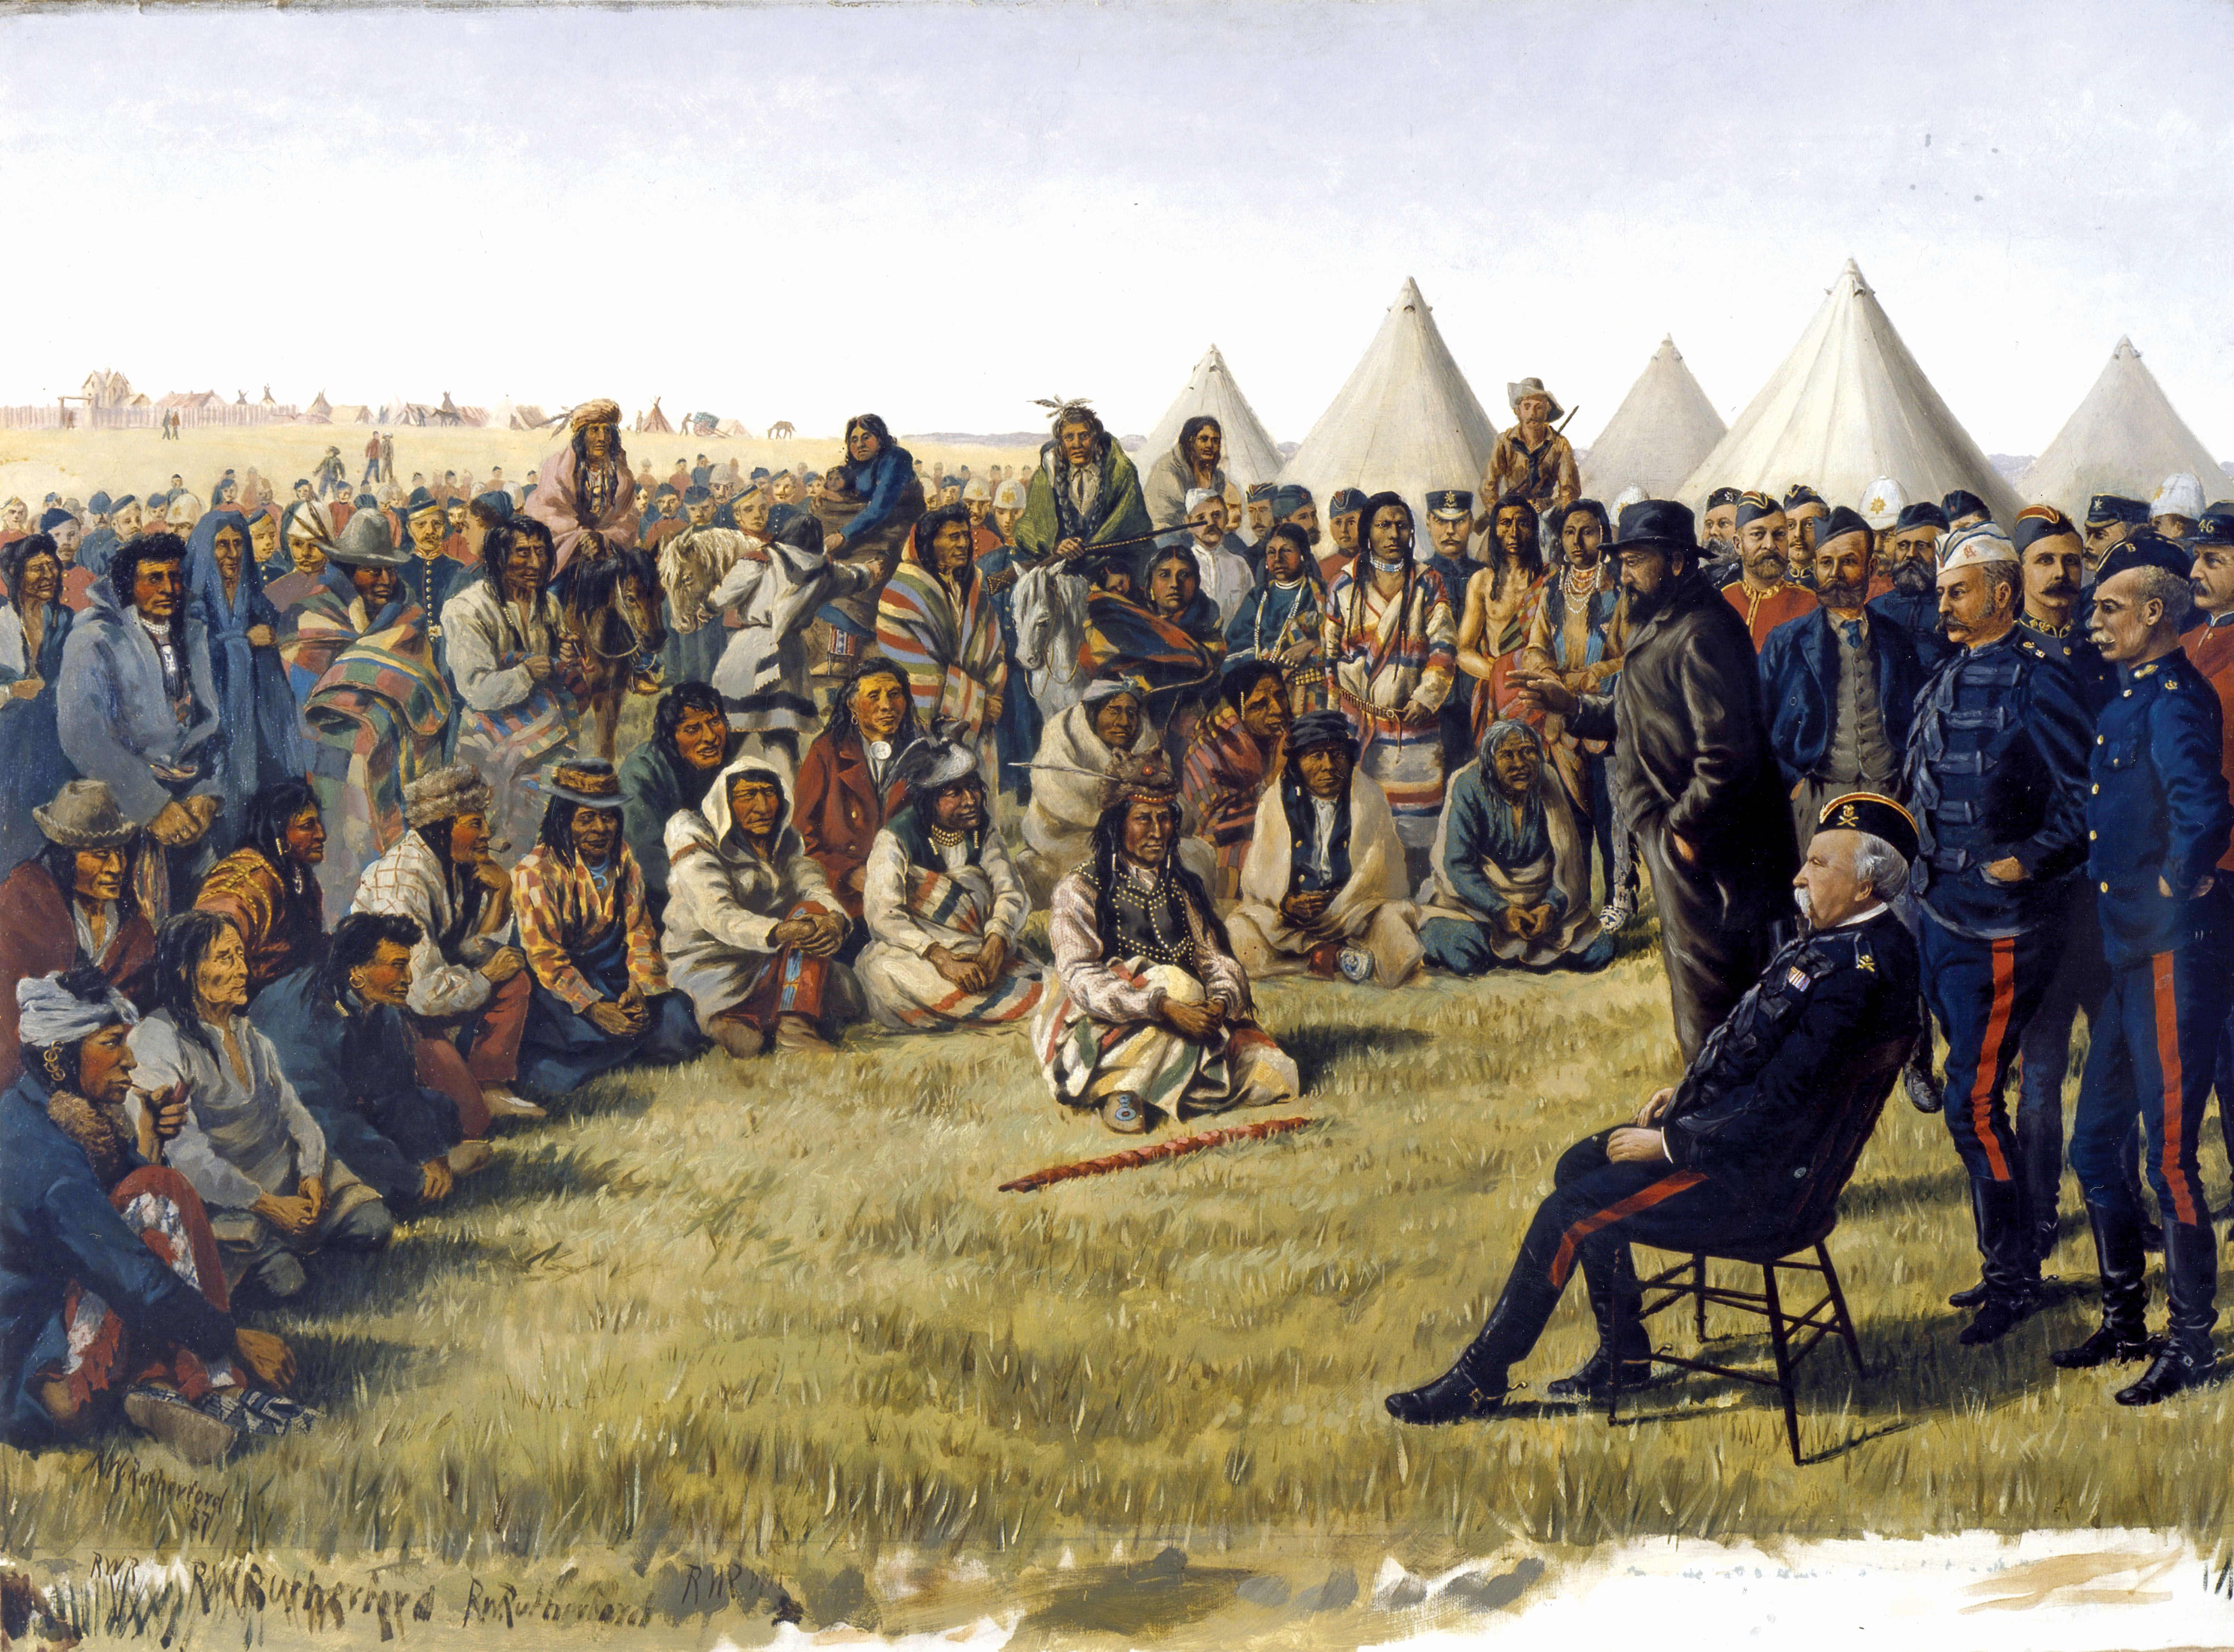 The Surrender of Poundmaker to Major-General Middleton at Battleford, Saskatchewan, on May 26, 1885 Poundmaker (Pihtokahanapiwiyin) was born around 1842 in the Battleford area. His mother was a mixed-blood Cree, sister of Chief Mistawasis. He was adopted by Chief Crowfoot, a Blackfoot, thereby creating family ties between two nations. He and his people settled on a reserve about forty miles west of Battleford soon after signing Treaty 6. In 1885, Poundmaker, with members of his band, traveled to Battleford to ask for rations. When they arrived, they found the community deserted and helped themselves to supplies. In response, Lieutenant-Colonel William Otter and 325 troops were sent to Cut Knife Creek, where Poundmaker and his followers were encamped. On May 2, 1885, the Battle of Cut Knife Hill took place. At one point, Otter's men were forced to withdraw. When Poundmaker heard of Louis Riel's defeat at Batoche, he surrendered and was imprisoned. Poundmaker was tried and convicted of treason in Regina, and sentenced to serve three years at Stony Mountain Penitentiary (Man.). He died in 1886 from poor health.